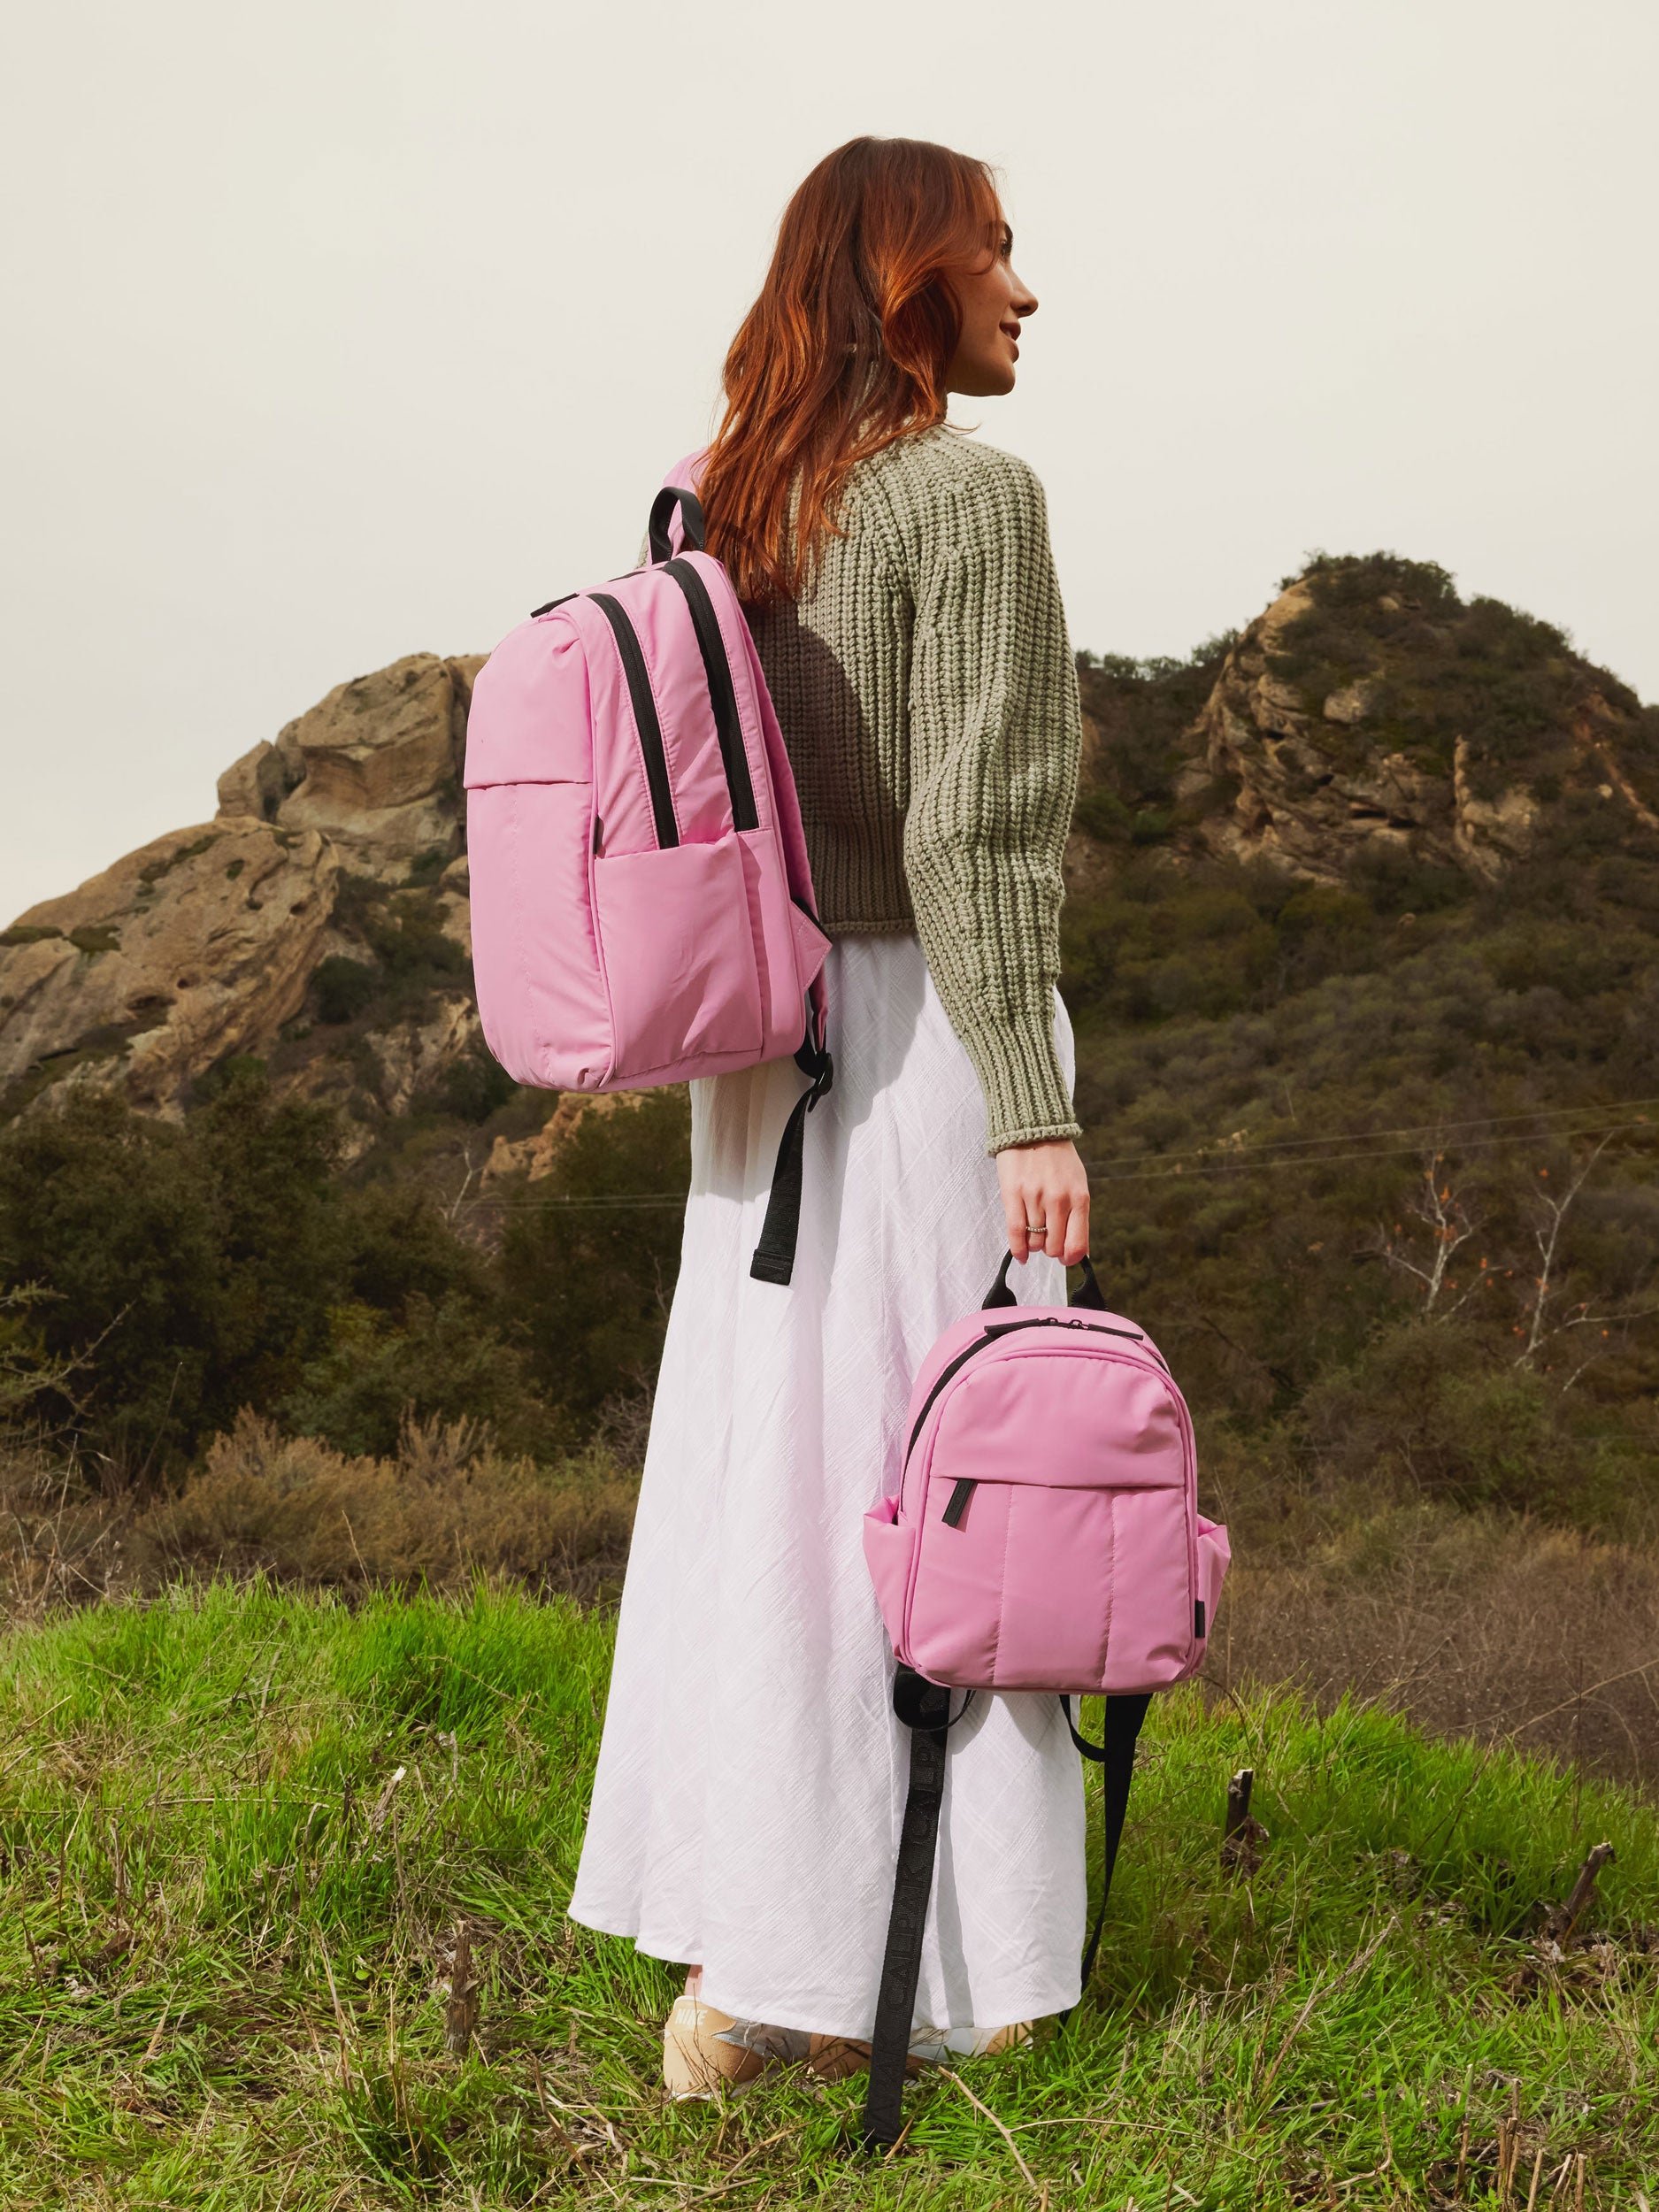 CALPAK Luka small everyday Backpack with adjustable straps and side pockets in bubblegum pink